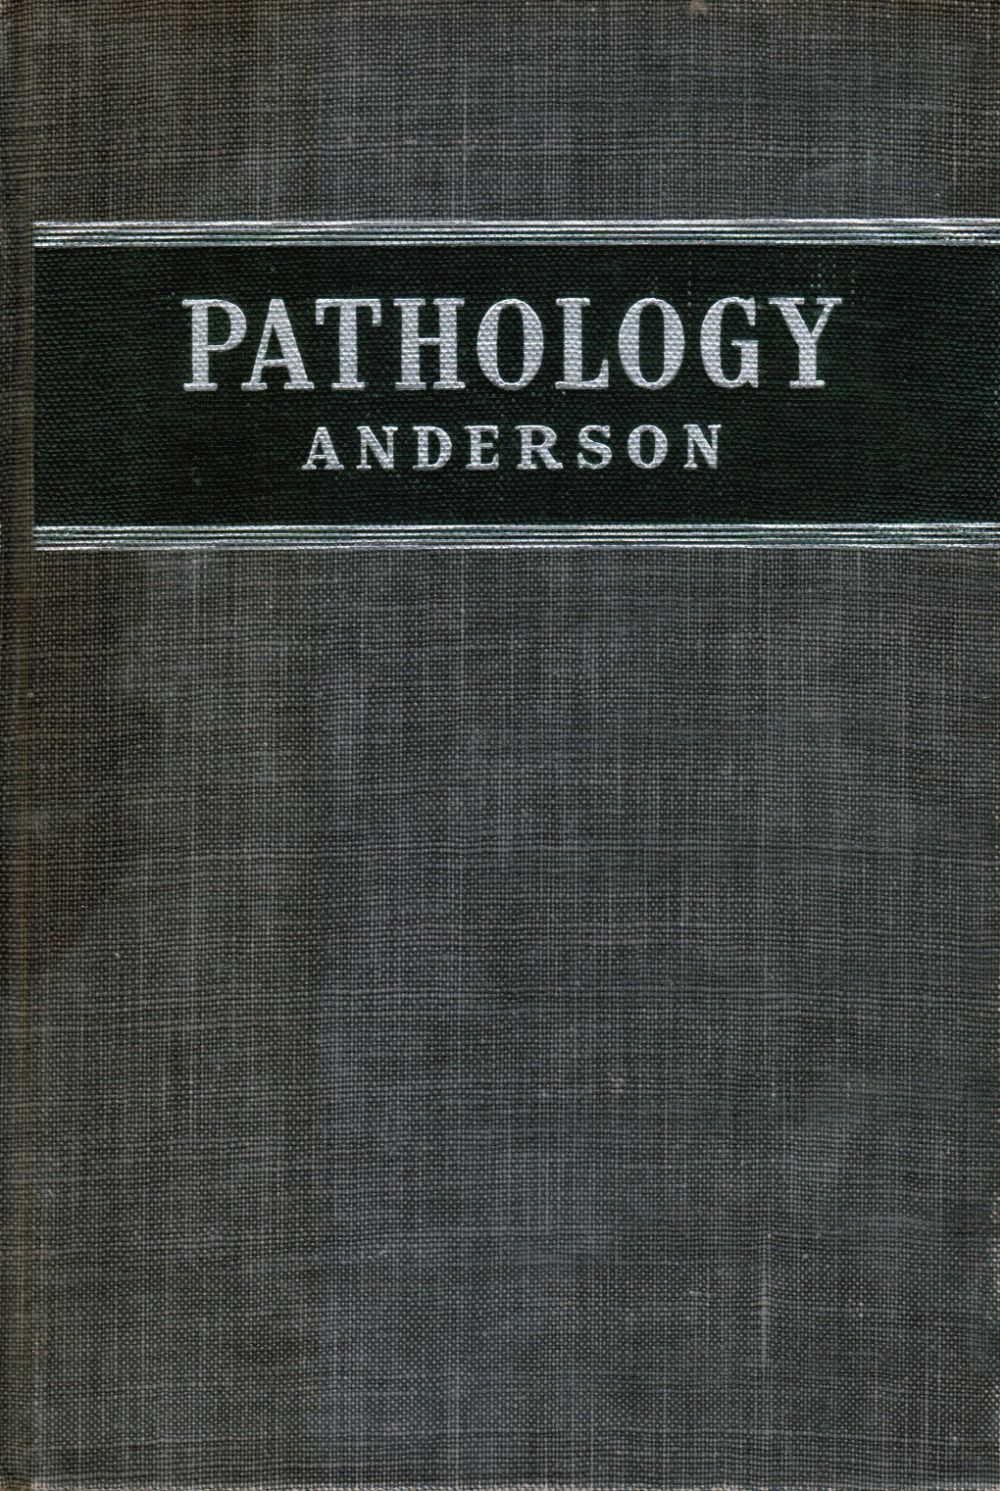 ANDERSON, W. A. D. (EDITOR) - Pathology